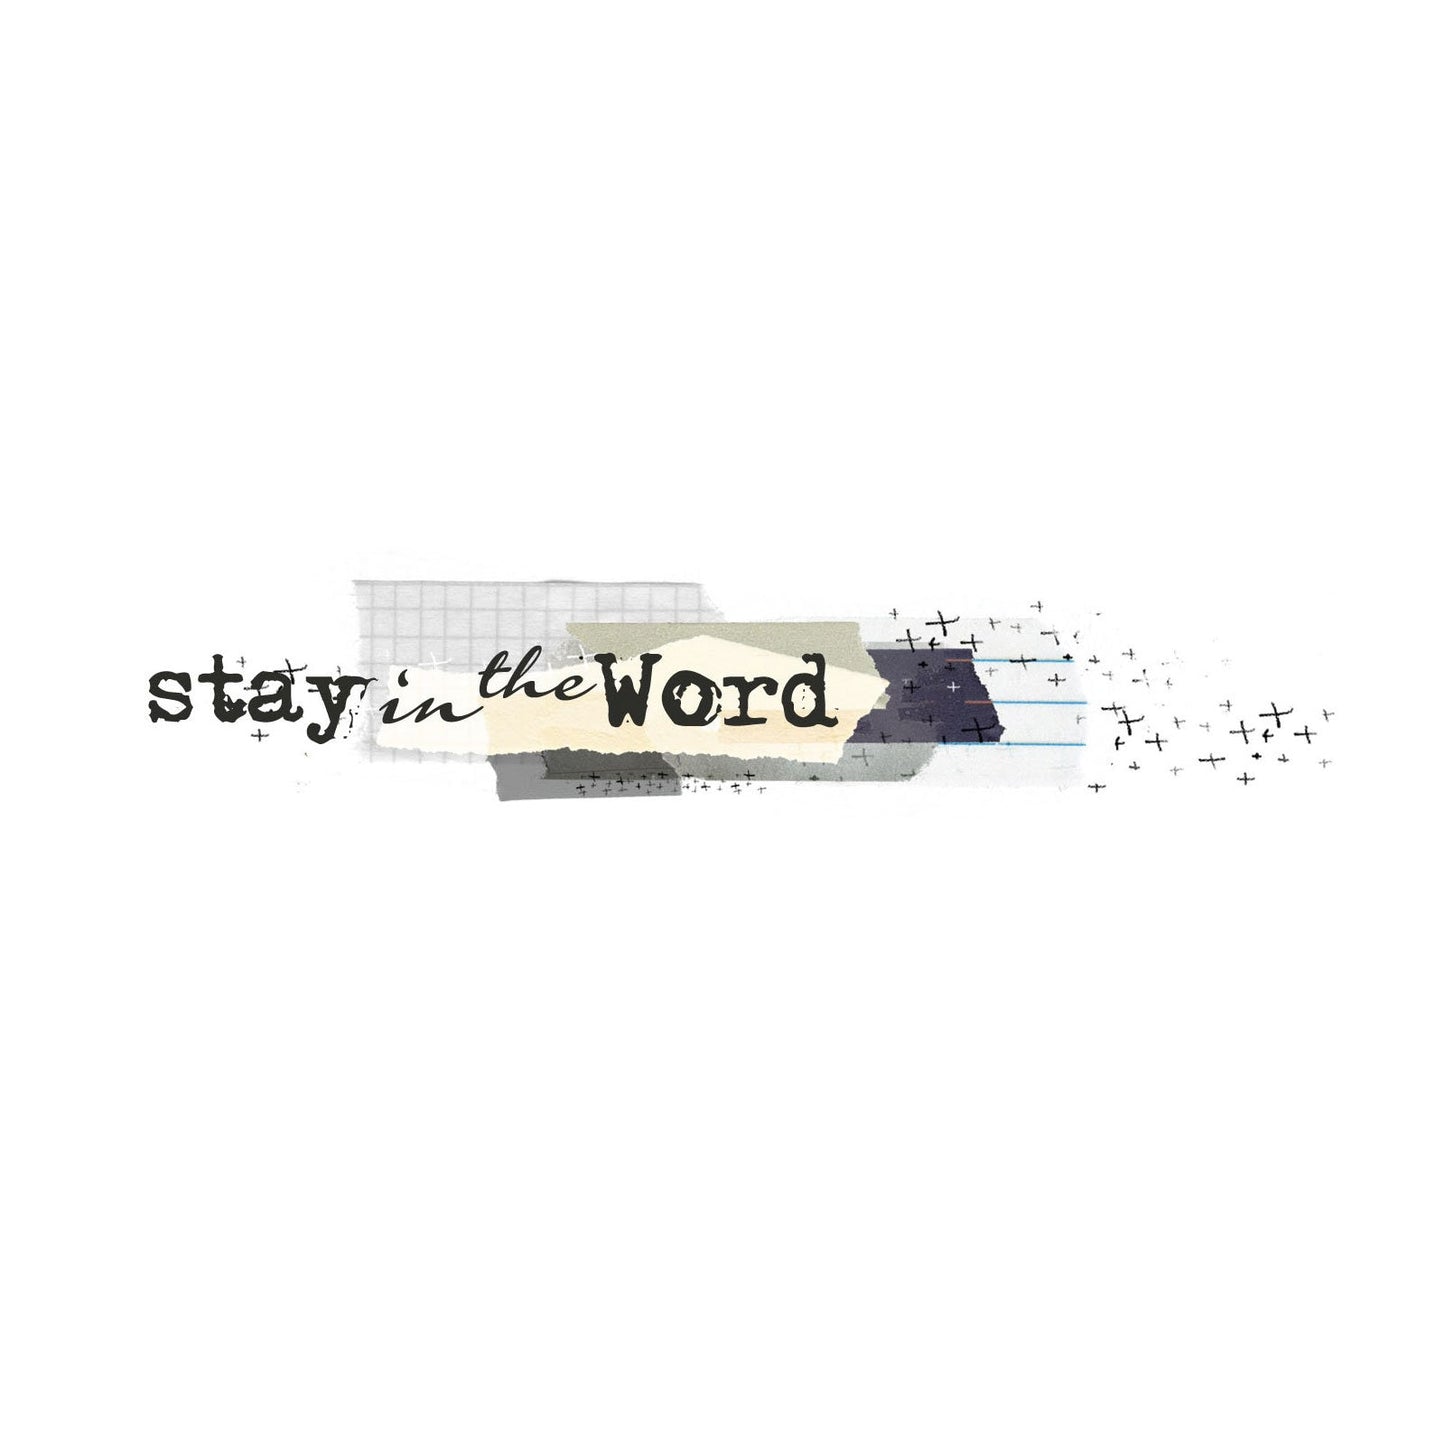 Stay in the Word - Washi Strips and sticker collection - digital download for bible journaling, card making and craft